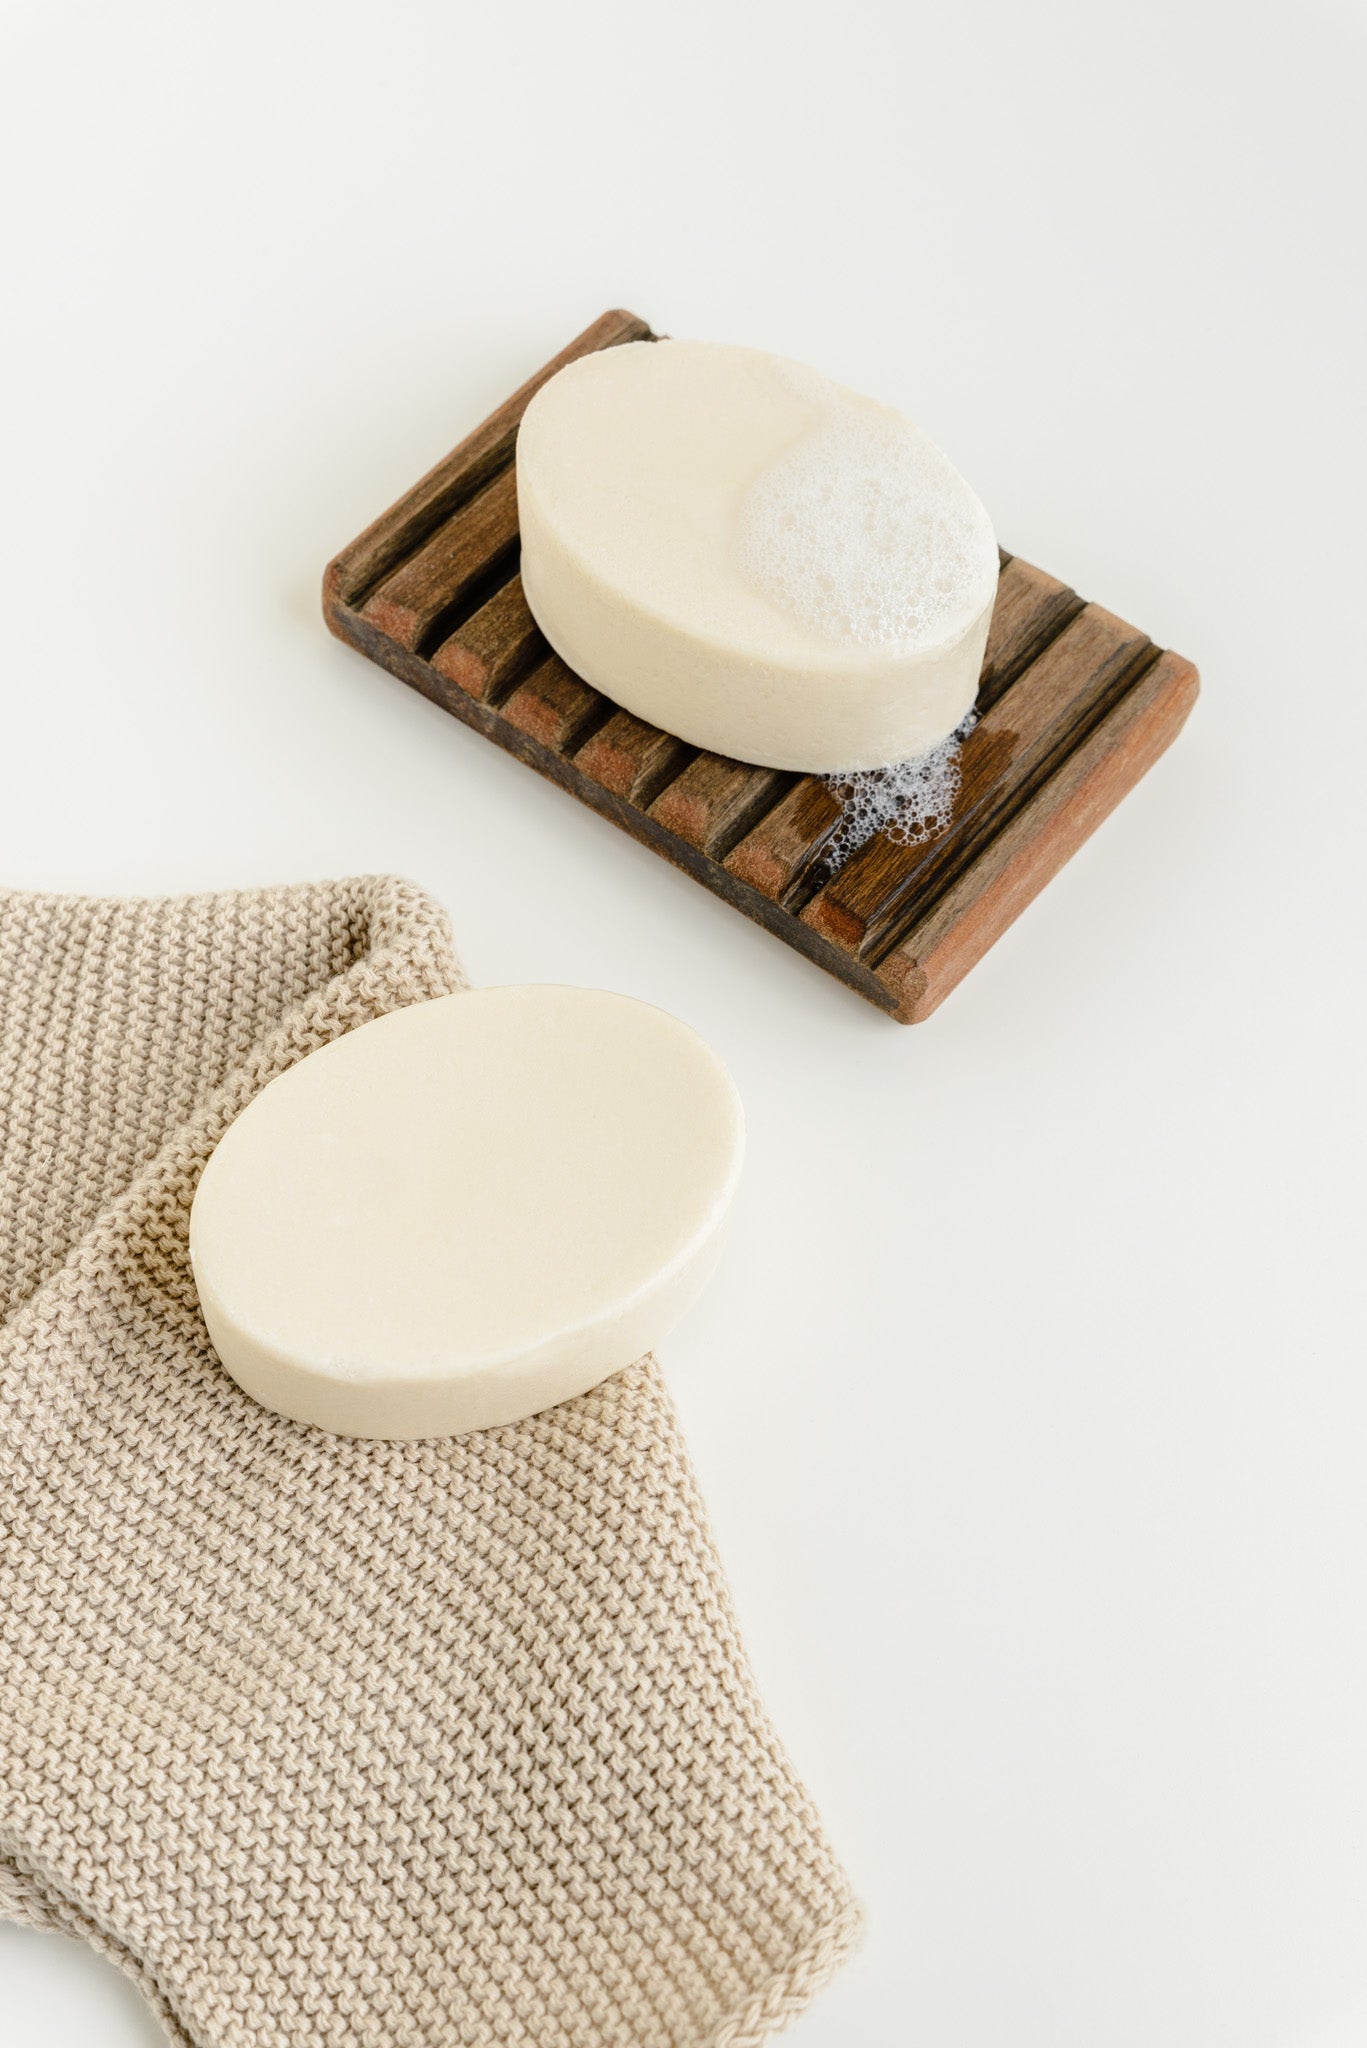 2 shampoo bars pictured against a white background. 1 is wet with foam and placed on a wooden soap tray. The other is placed on a beige cloth.